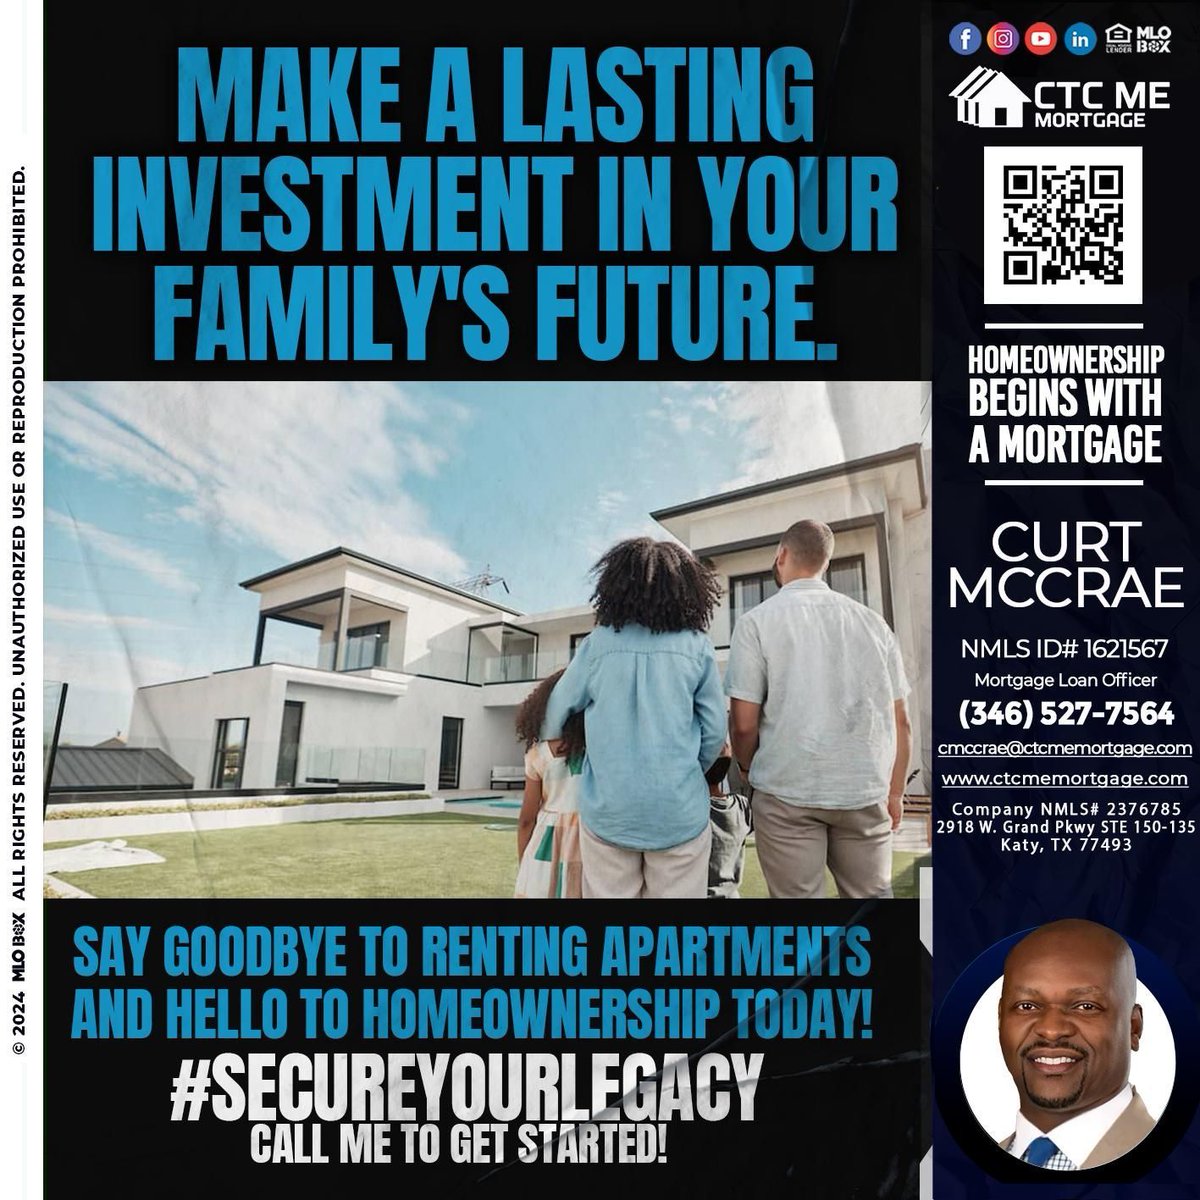 Invest in your family's future! Contact me today to start your journey to homeownership. 🚩 👪 🏠
Click here: buff.ly/3WvoODM 
#home #investment #homeownership #propertyinvestment #realestate #investinyourhome #firsttimehomebuyer #dreamhome #realestatelife #homeinvestment